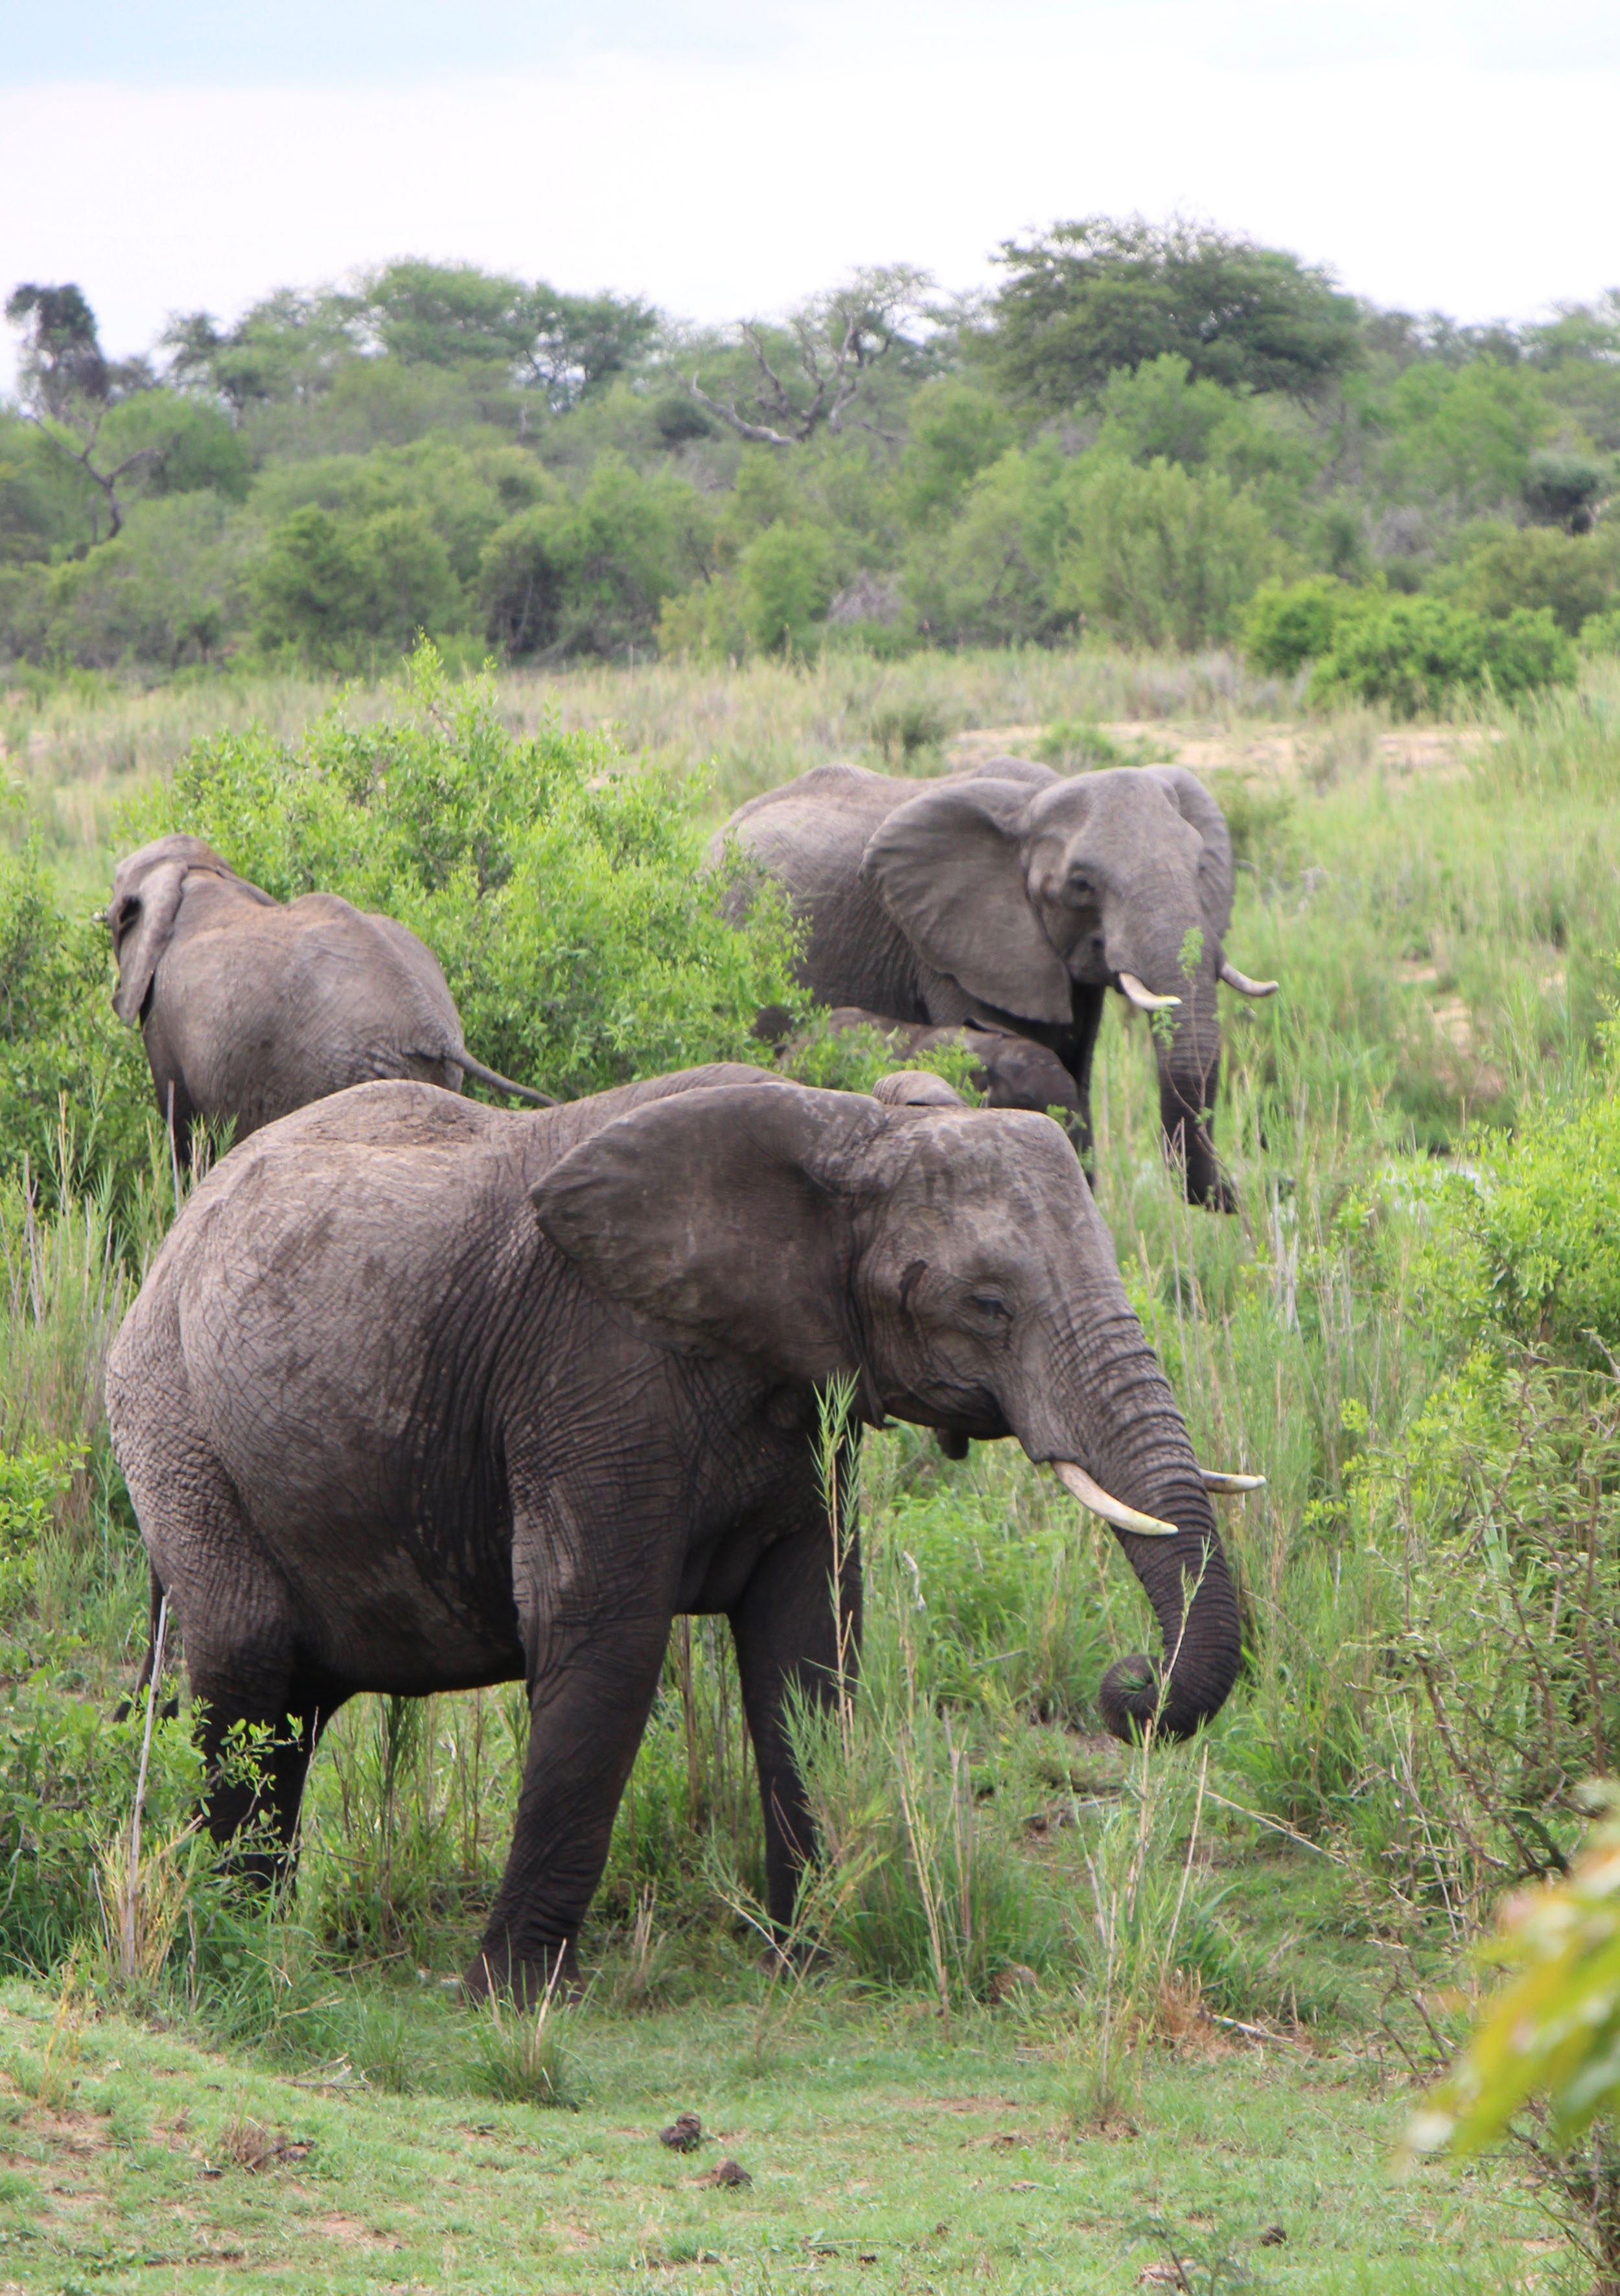 The elephants were like everything else in South Africa—big.